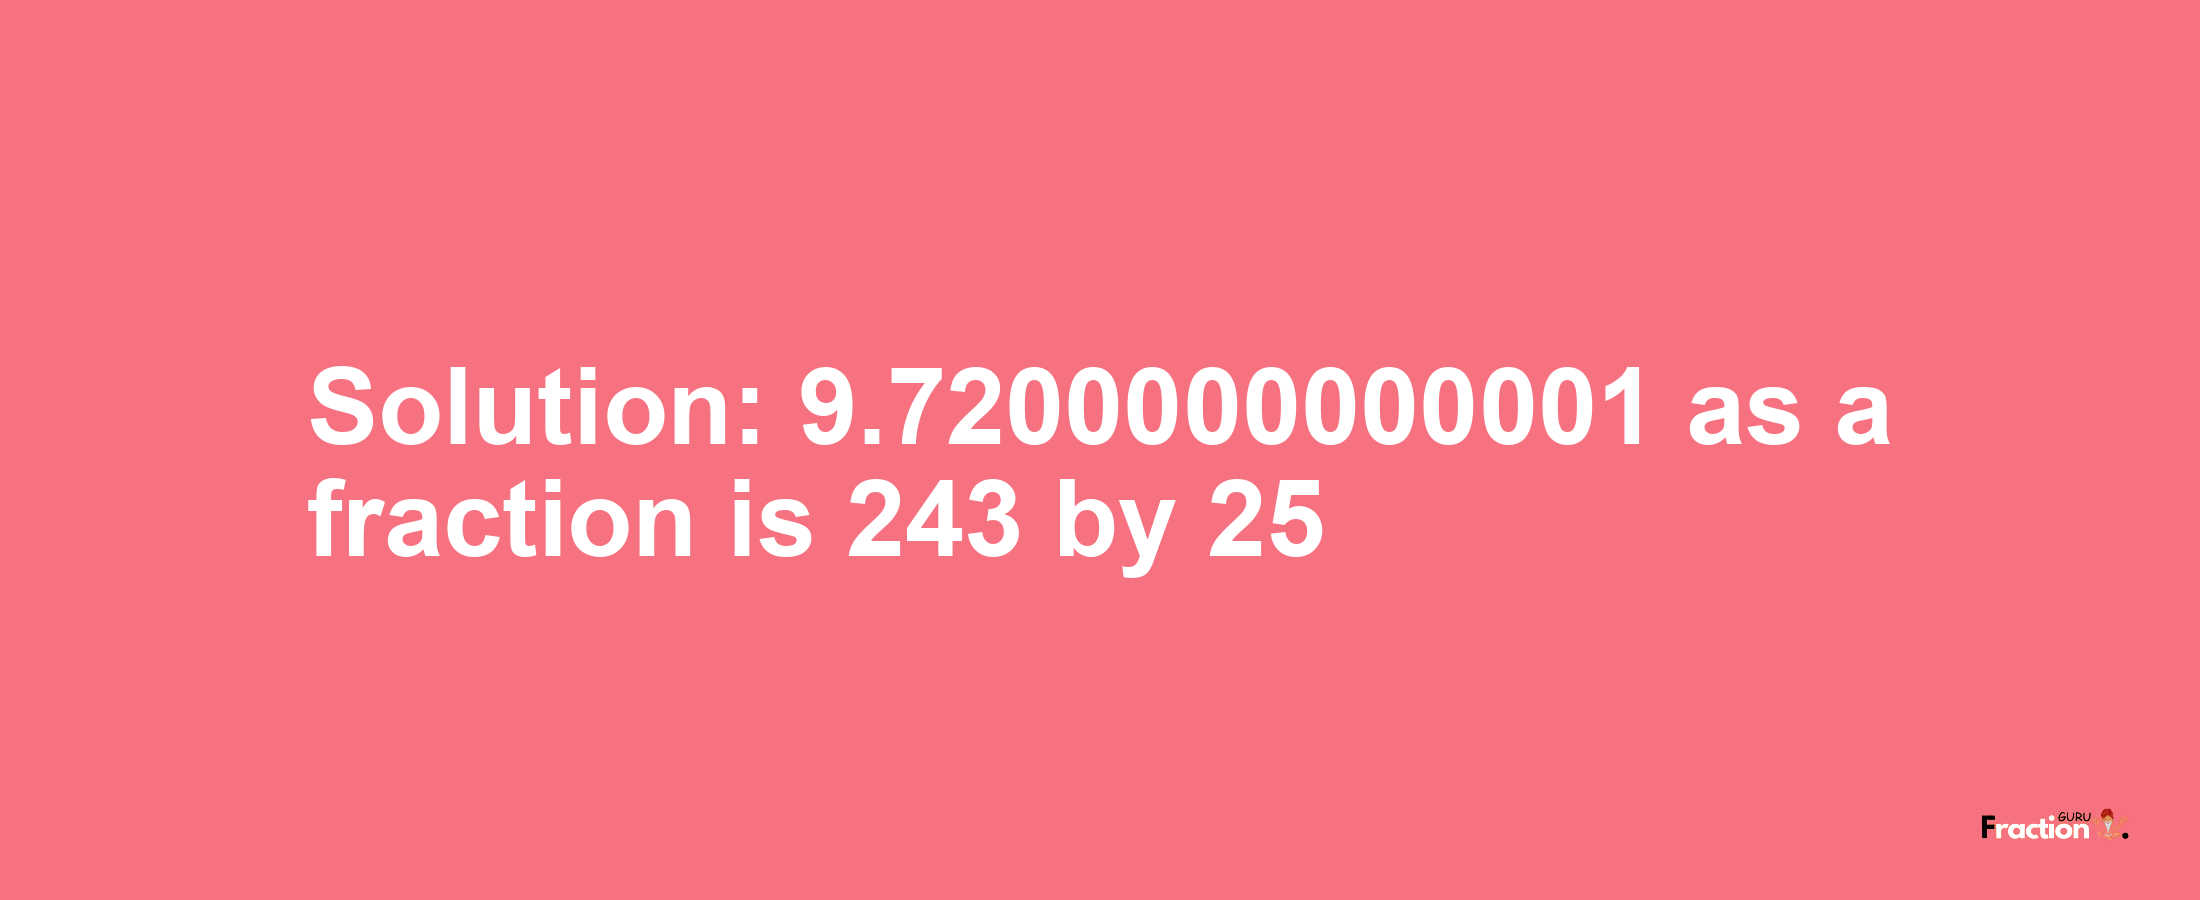 Solution:9.7200000000001 as a fraction is 243/25